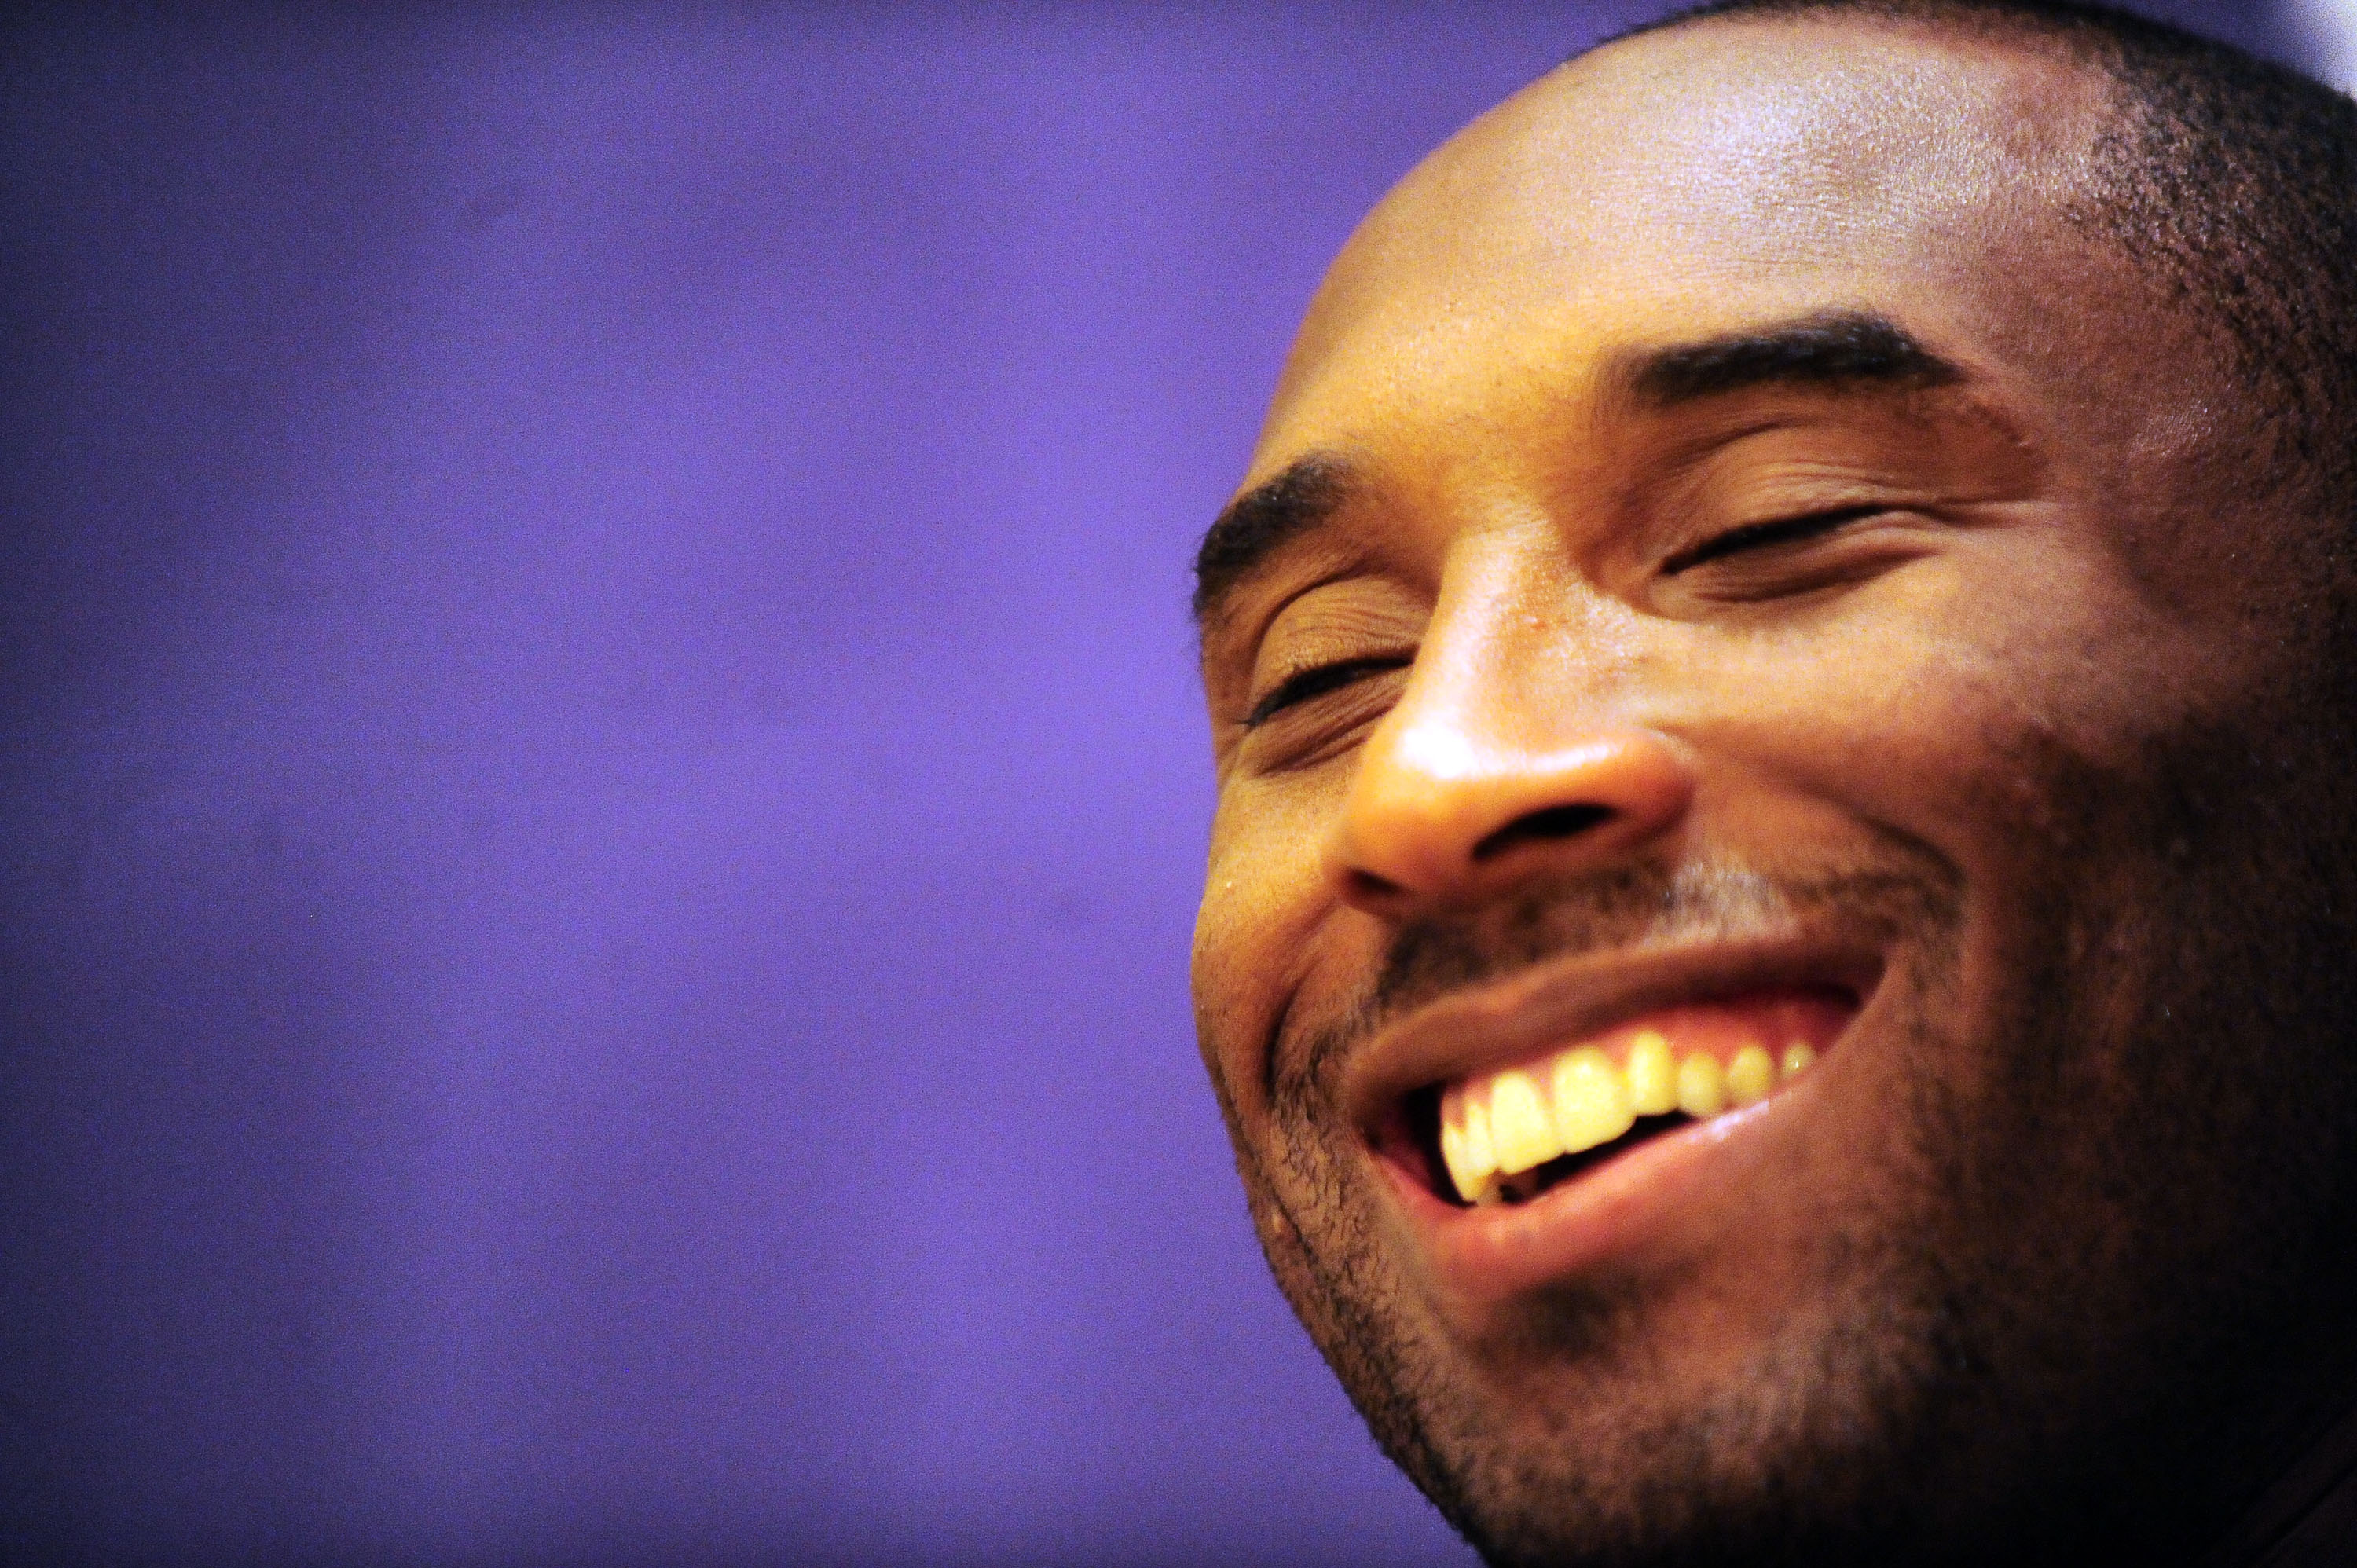 GUANGZHOU, CHINA - JULY 29:  (CHINA OUT) NBA player Kobe Bryant of the Los Angeles Lakers smiles during a meet and greet with fans at Jinan University on July 29, 2010 in Guangzhou, Guangdong Province of China.  (Photo by ChinaFotoPress/Getty Images)